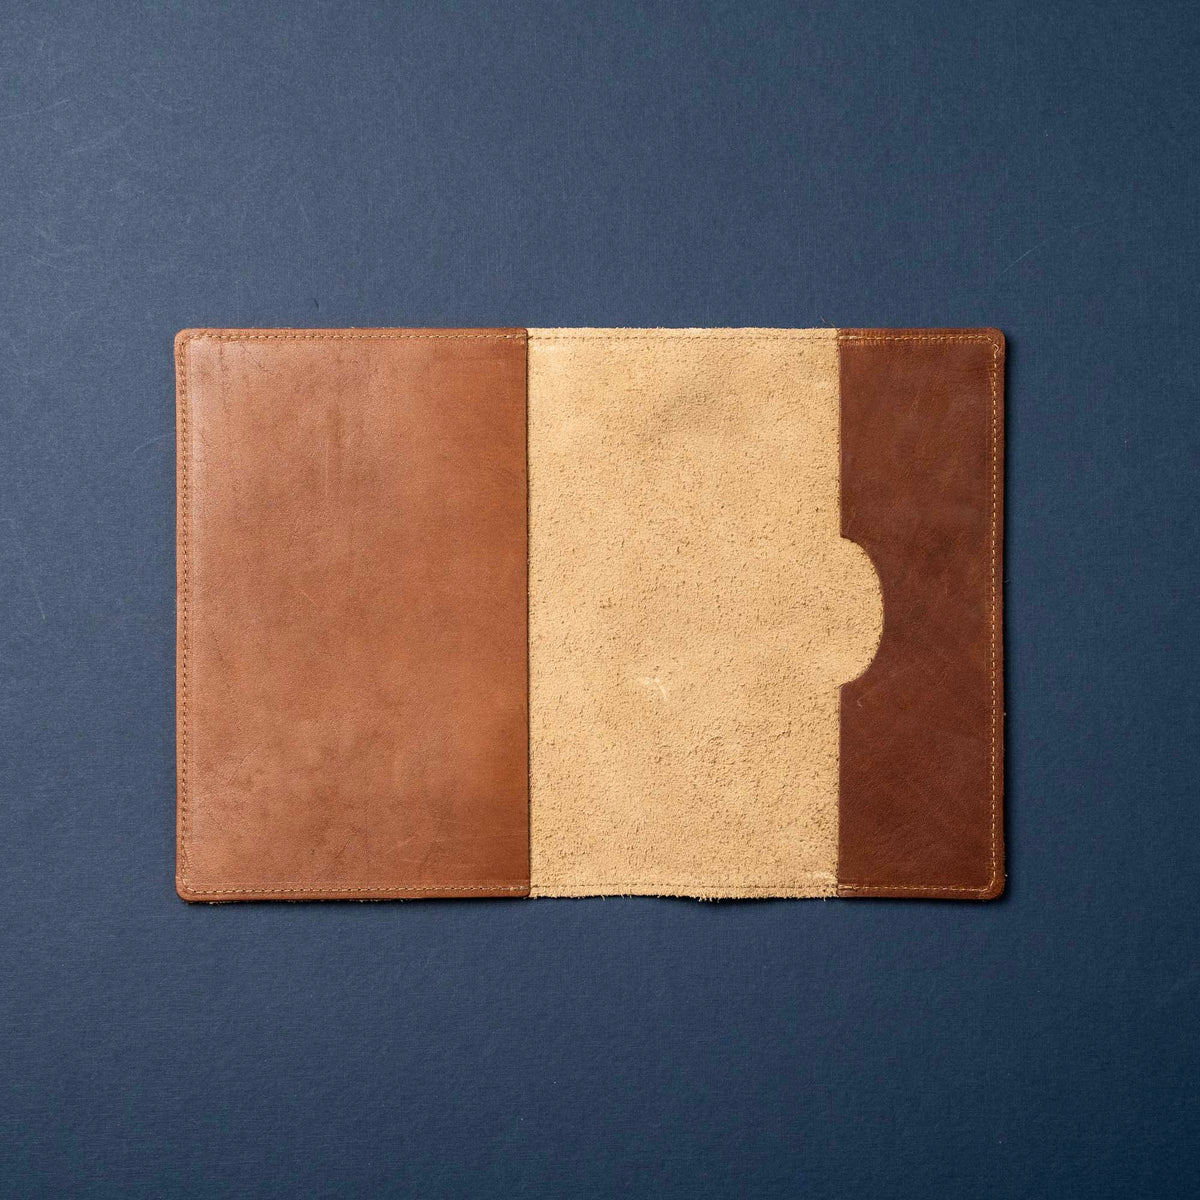 Tan Bison Leather - A5 Leather Journal - Personalized High Character (One-Of-A-Kind) Notebooks - 192 pages 8.75” x 6.25”